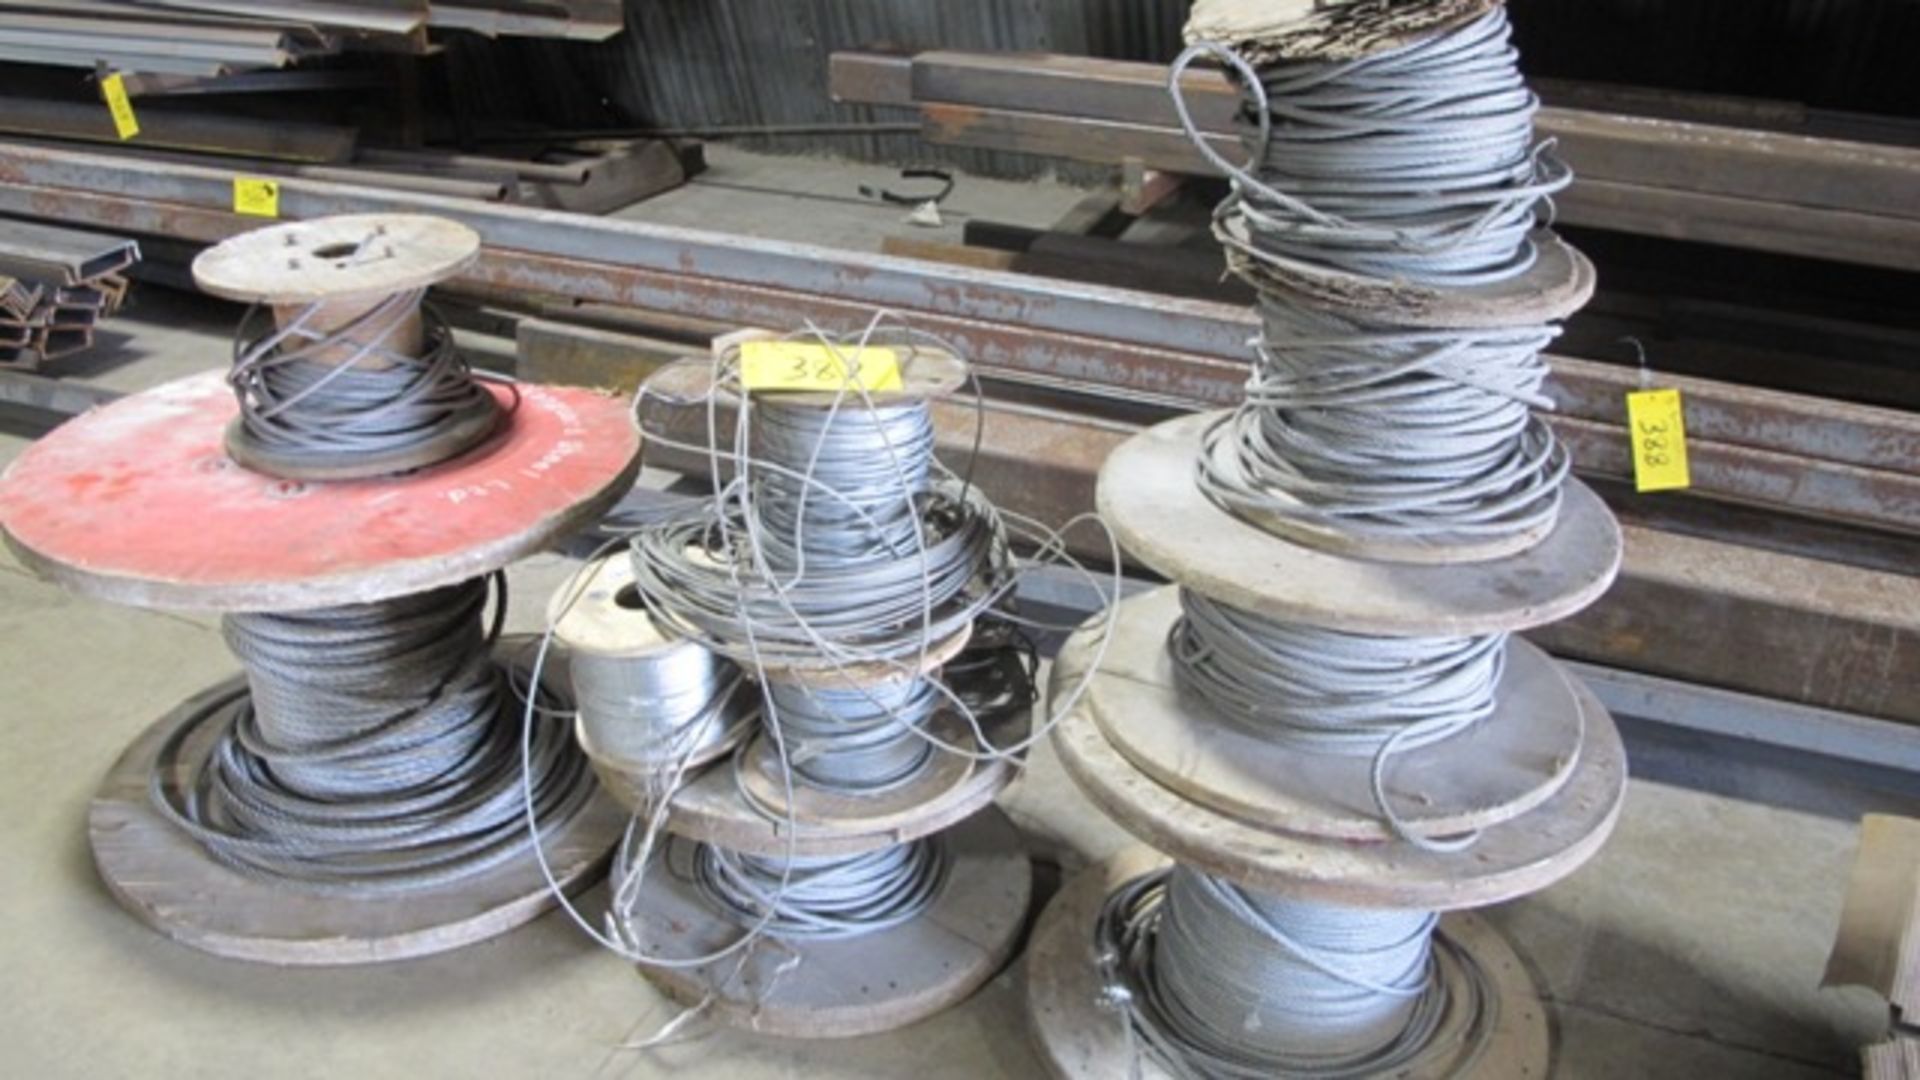 LOT OF (11) SPOOLS OF STEEL CABLES